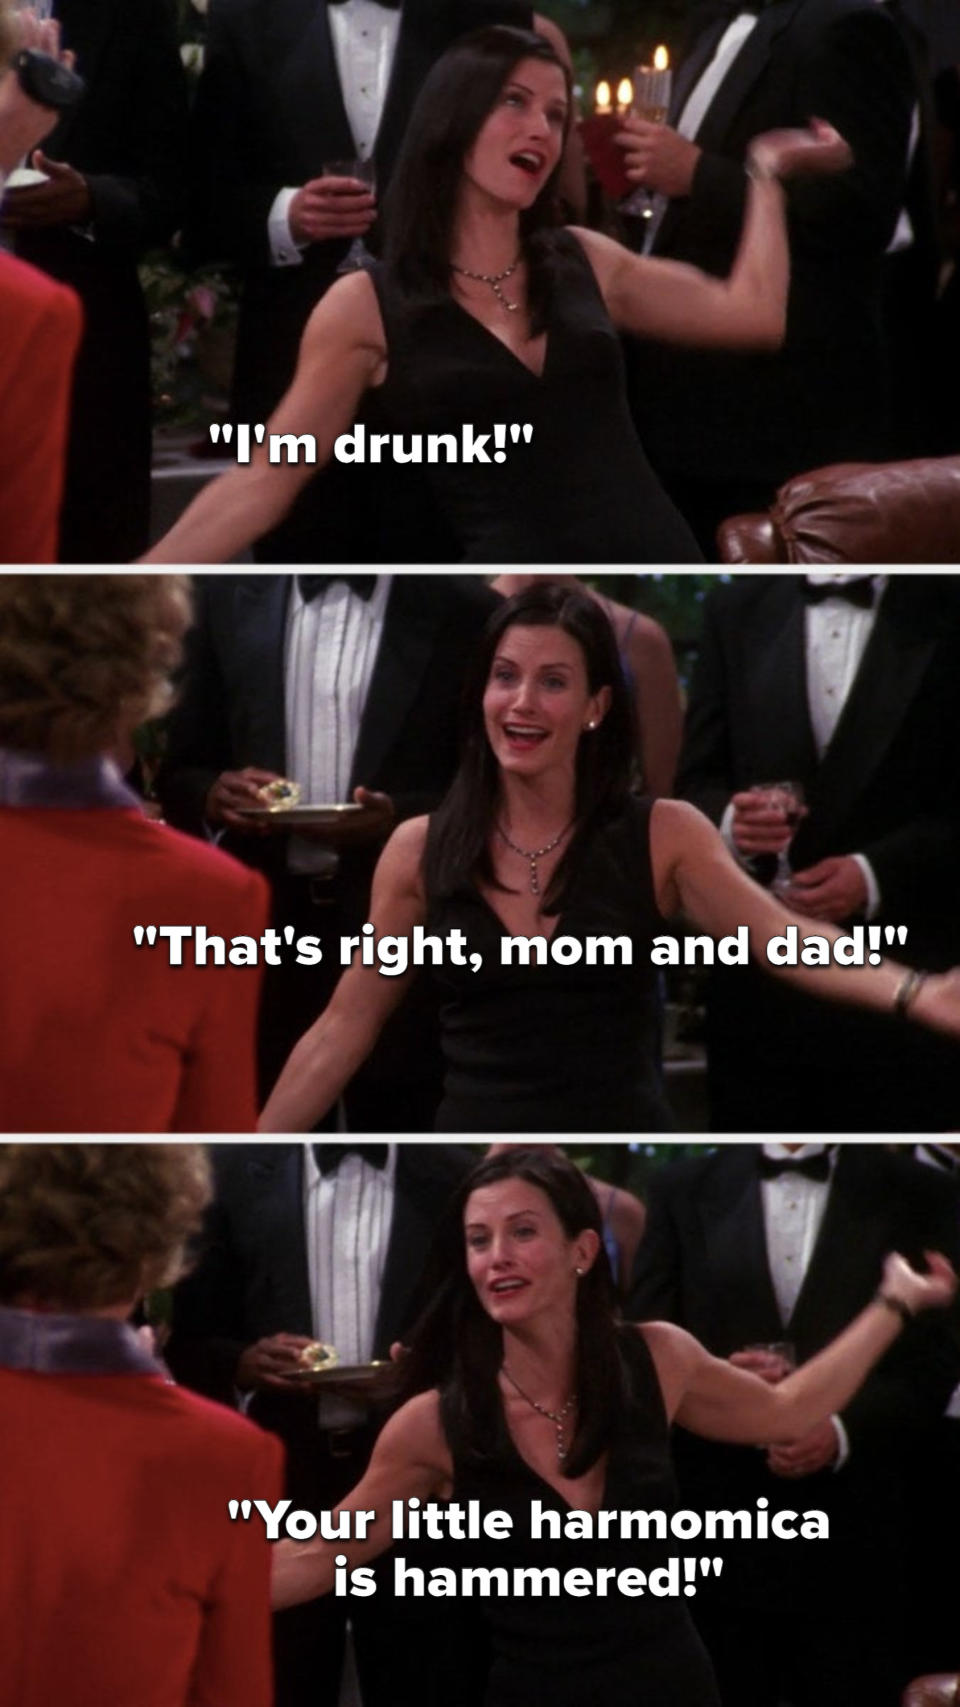 Monica says, I'm drunk, that's right, mom and dad, your little harmomica is hammered